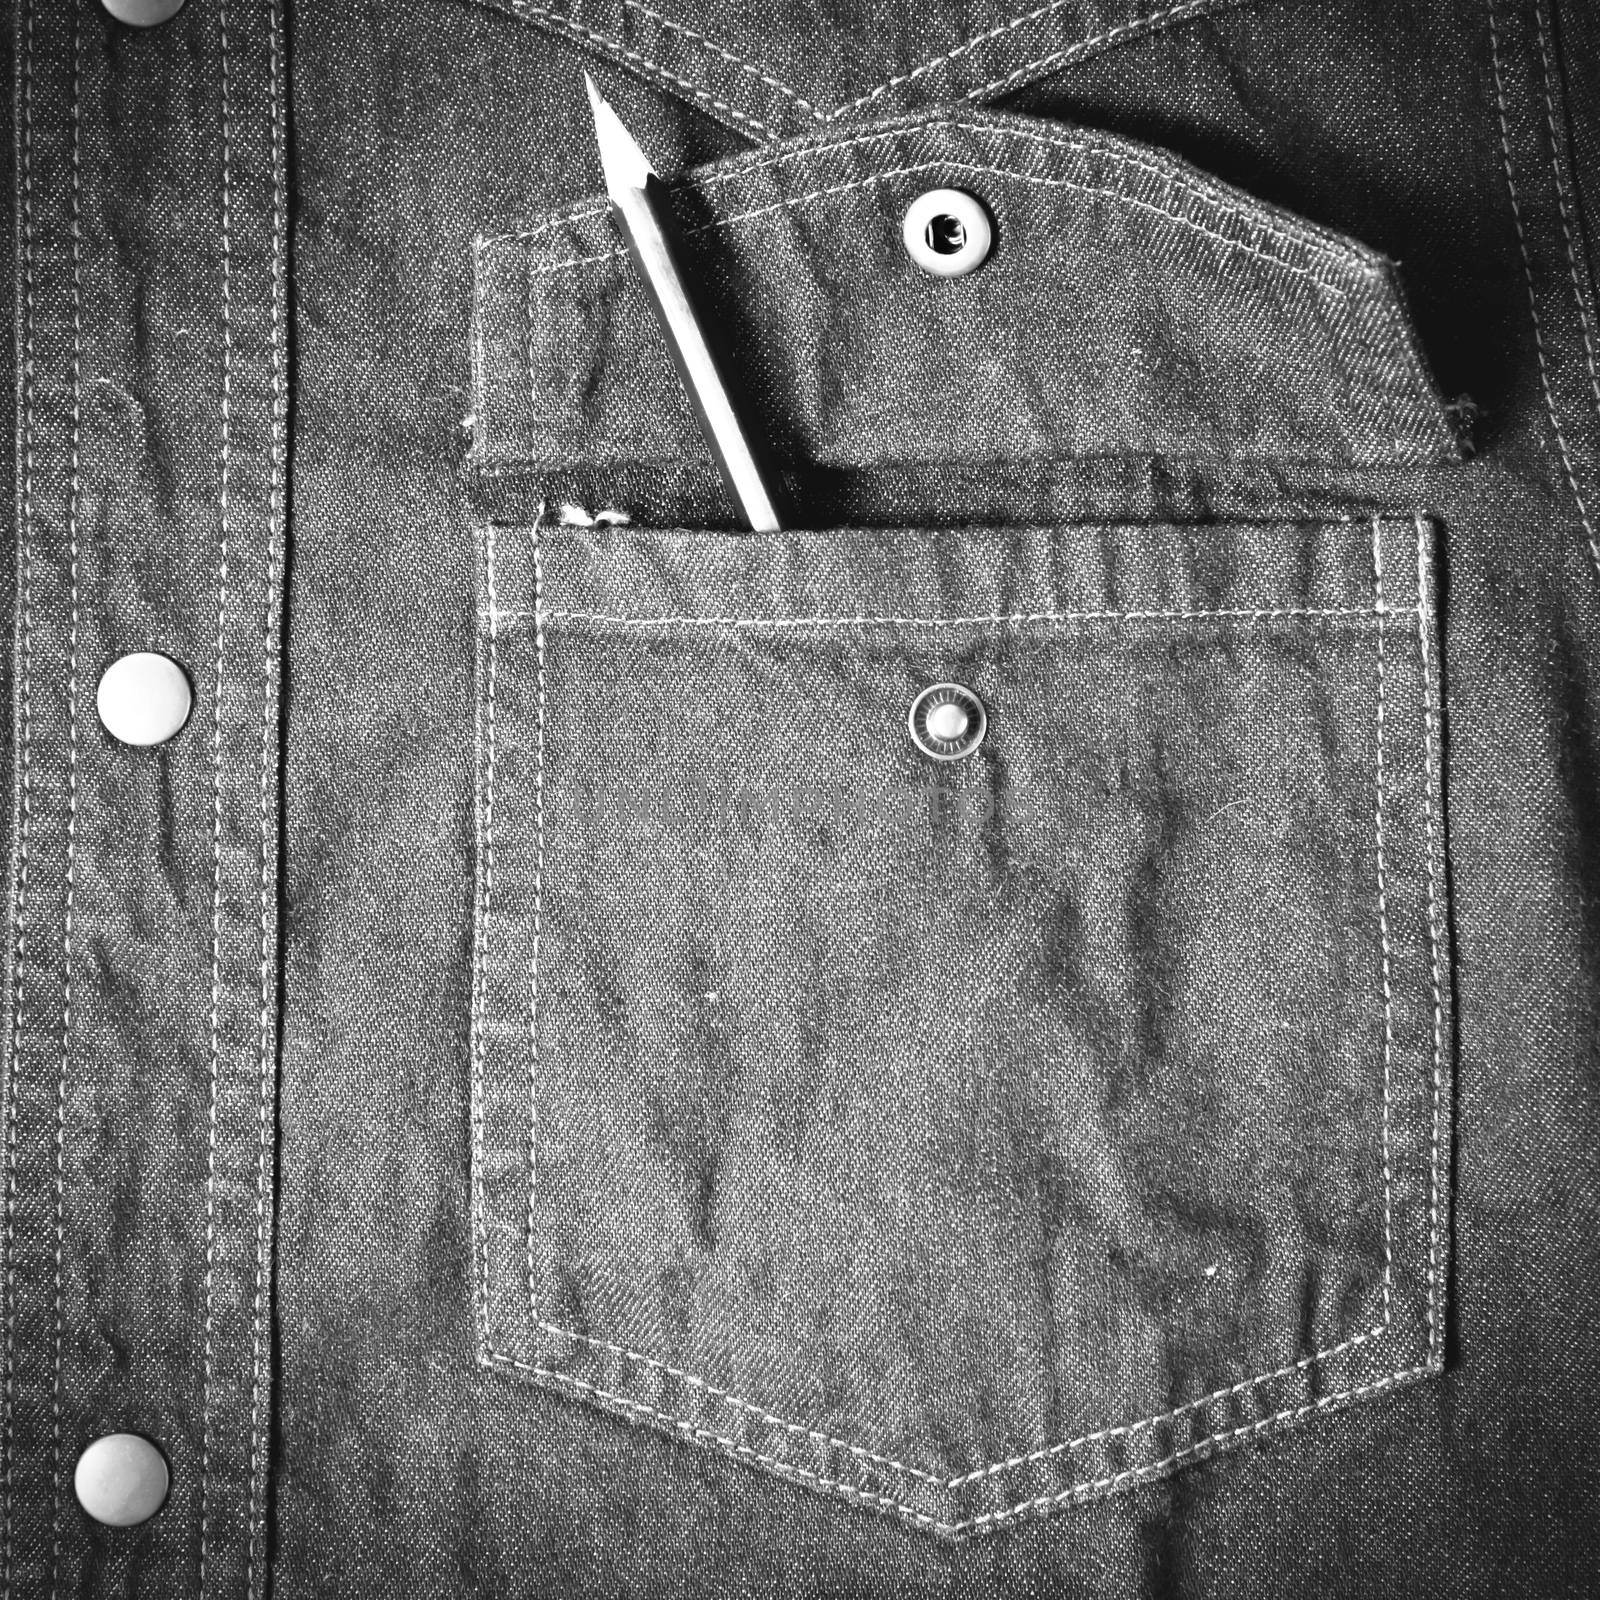 pencil in jean pocket black and white tone color style